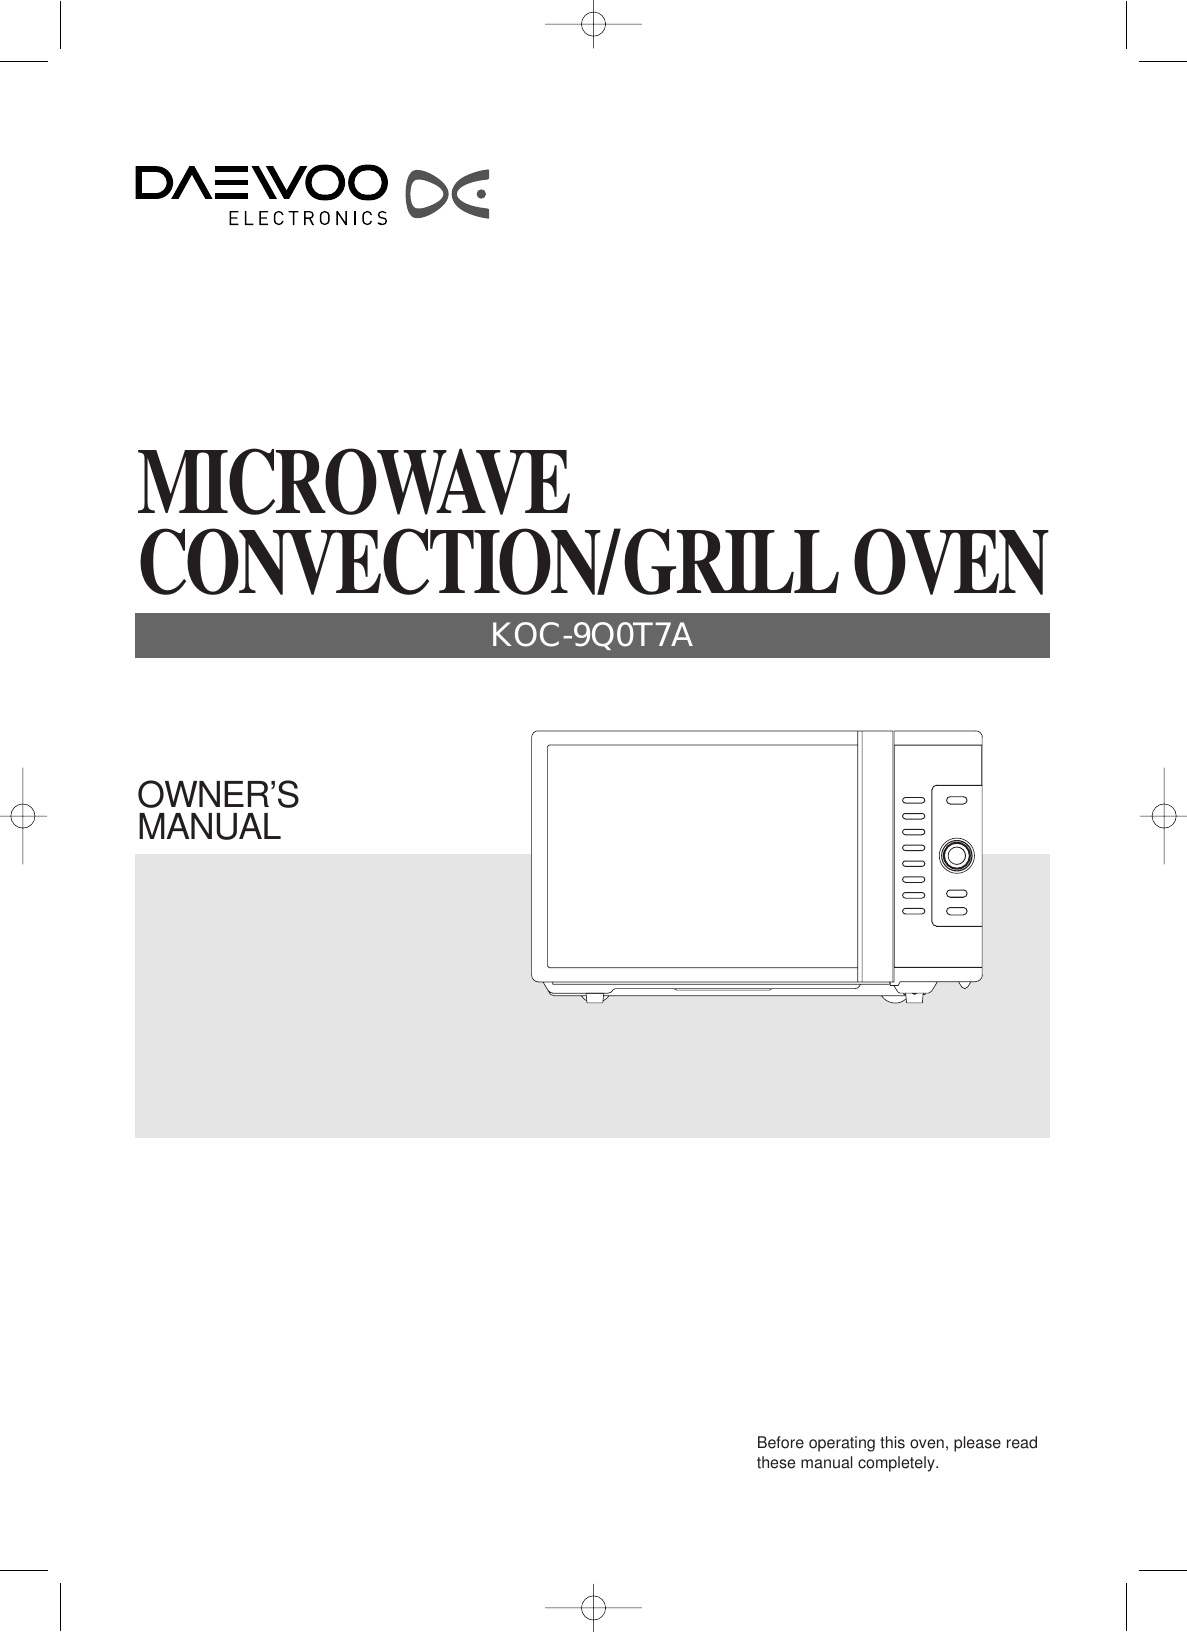 OWNER’SMANUALBefore operating this oven, please readthese manual completely.MICROWAVECONVECTION/GRILL OVENKOC-9Q0T7A